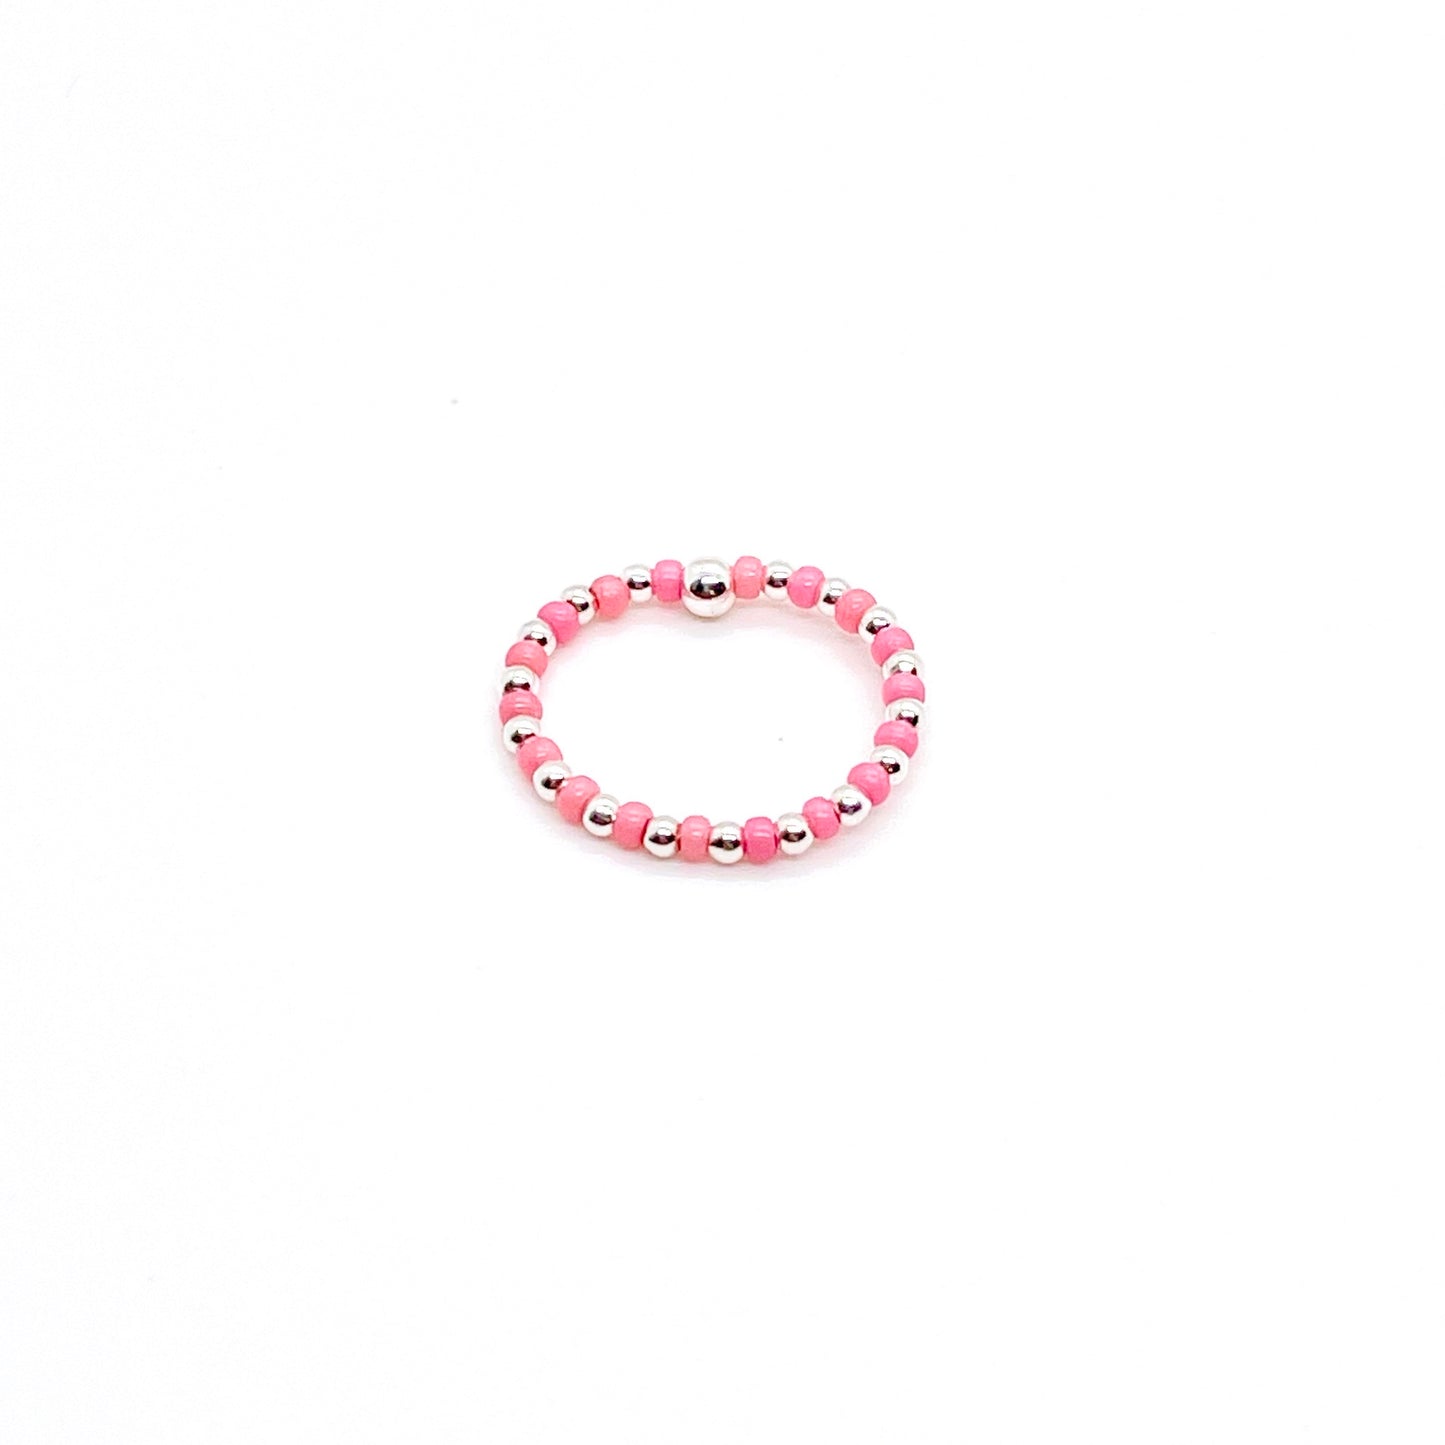 Seed bead ring with alternating 2mm silver ball and pink seed beads on stretch cord.